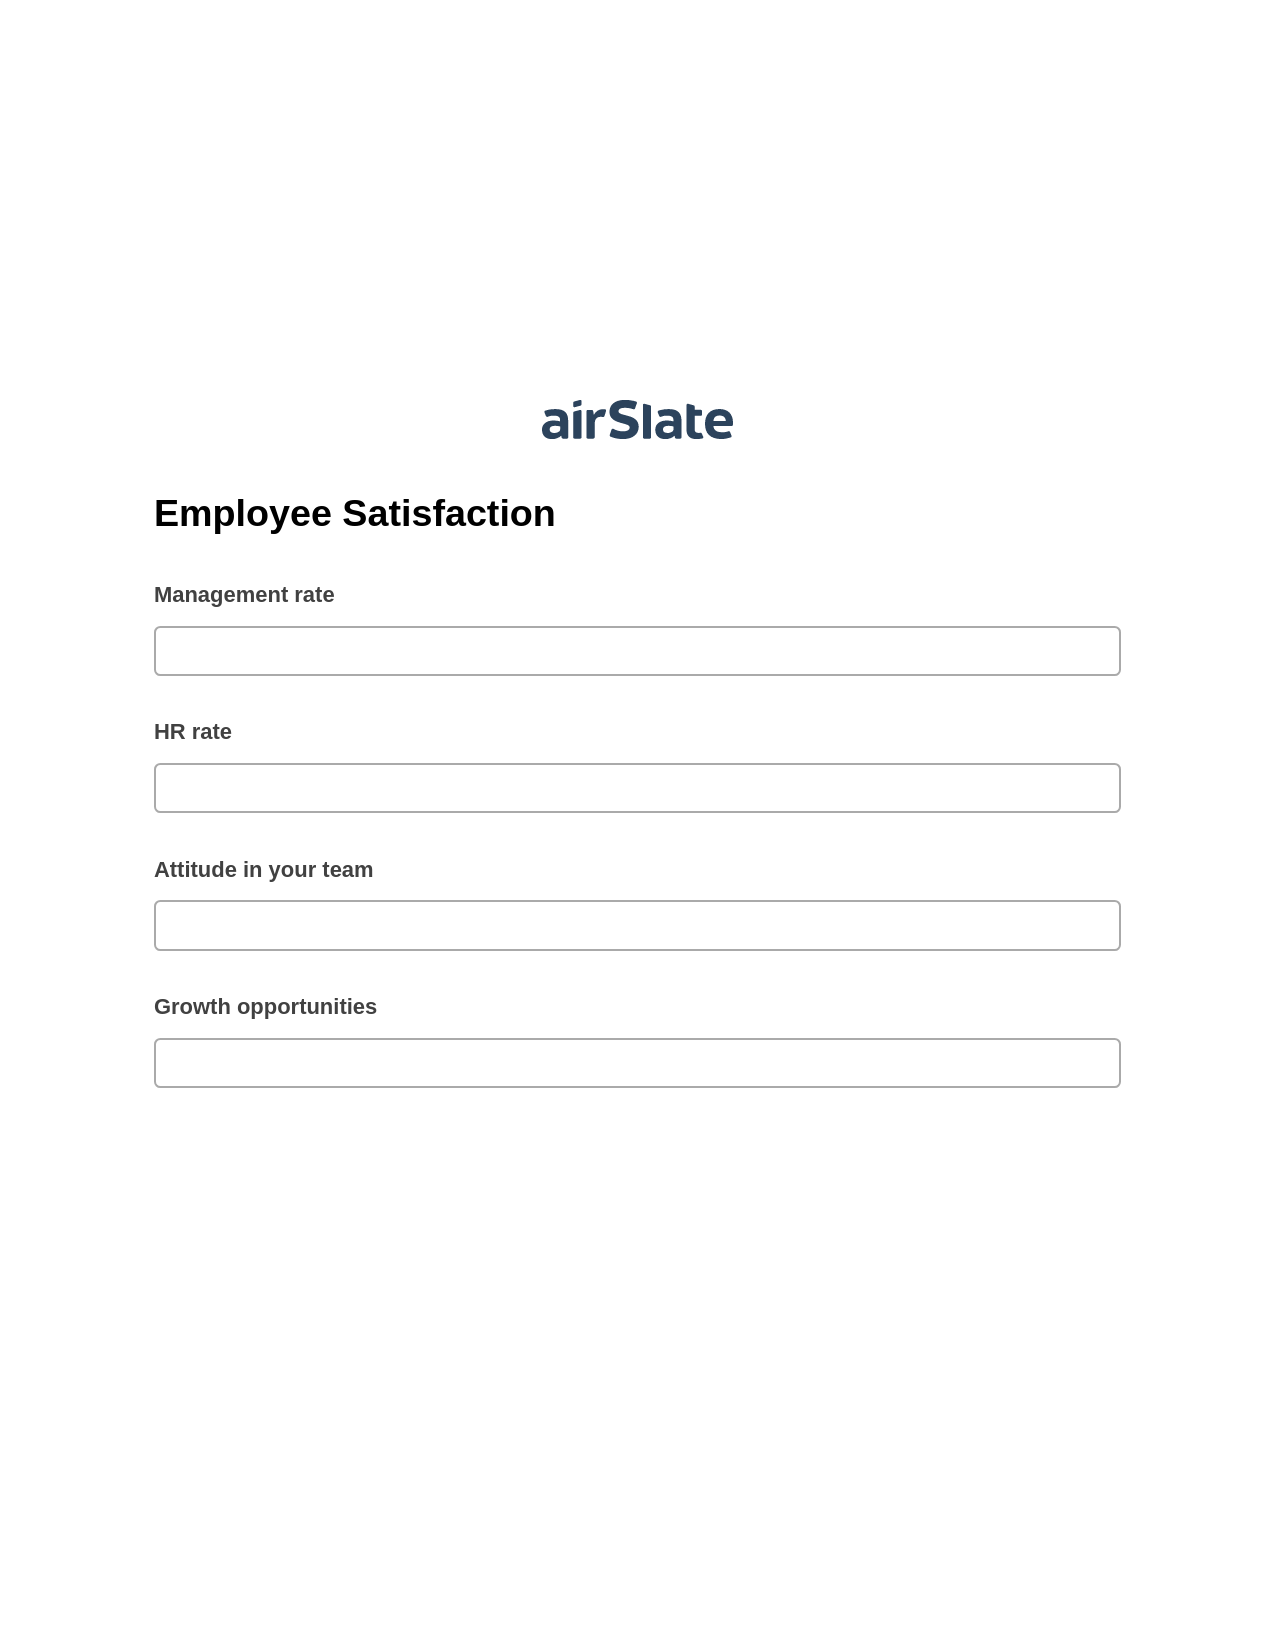 Employee Satisfaction Pre-fill Dropdowns from CSV File Bot, Create NetSuite Records Bot, Export to Formstack Documents Bot